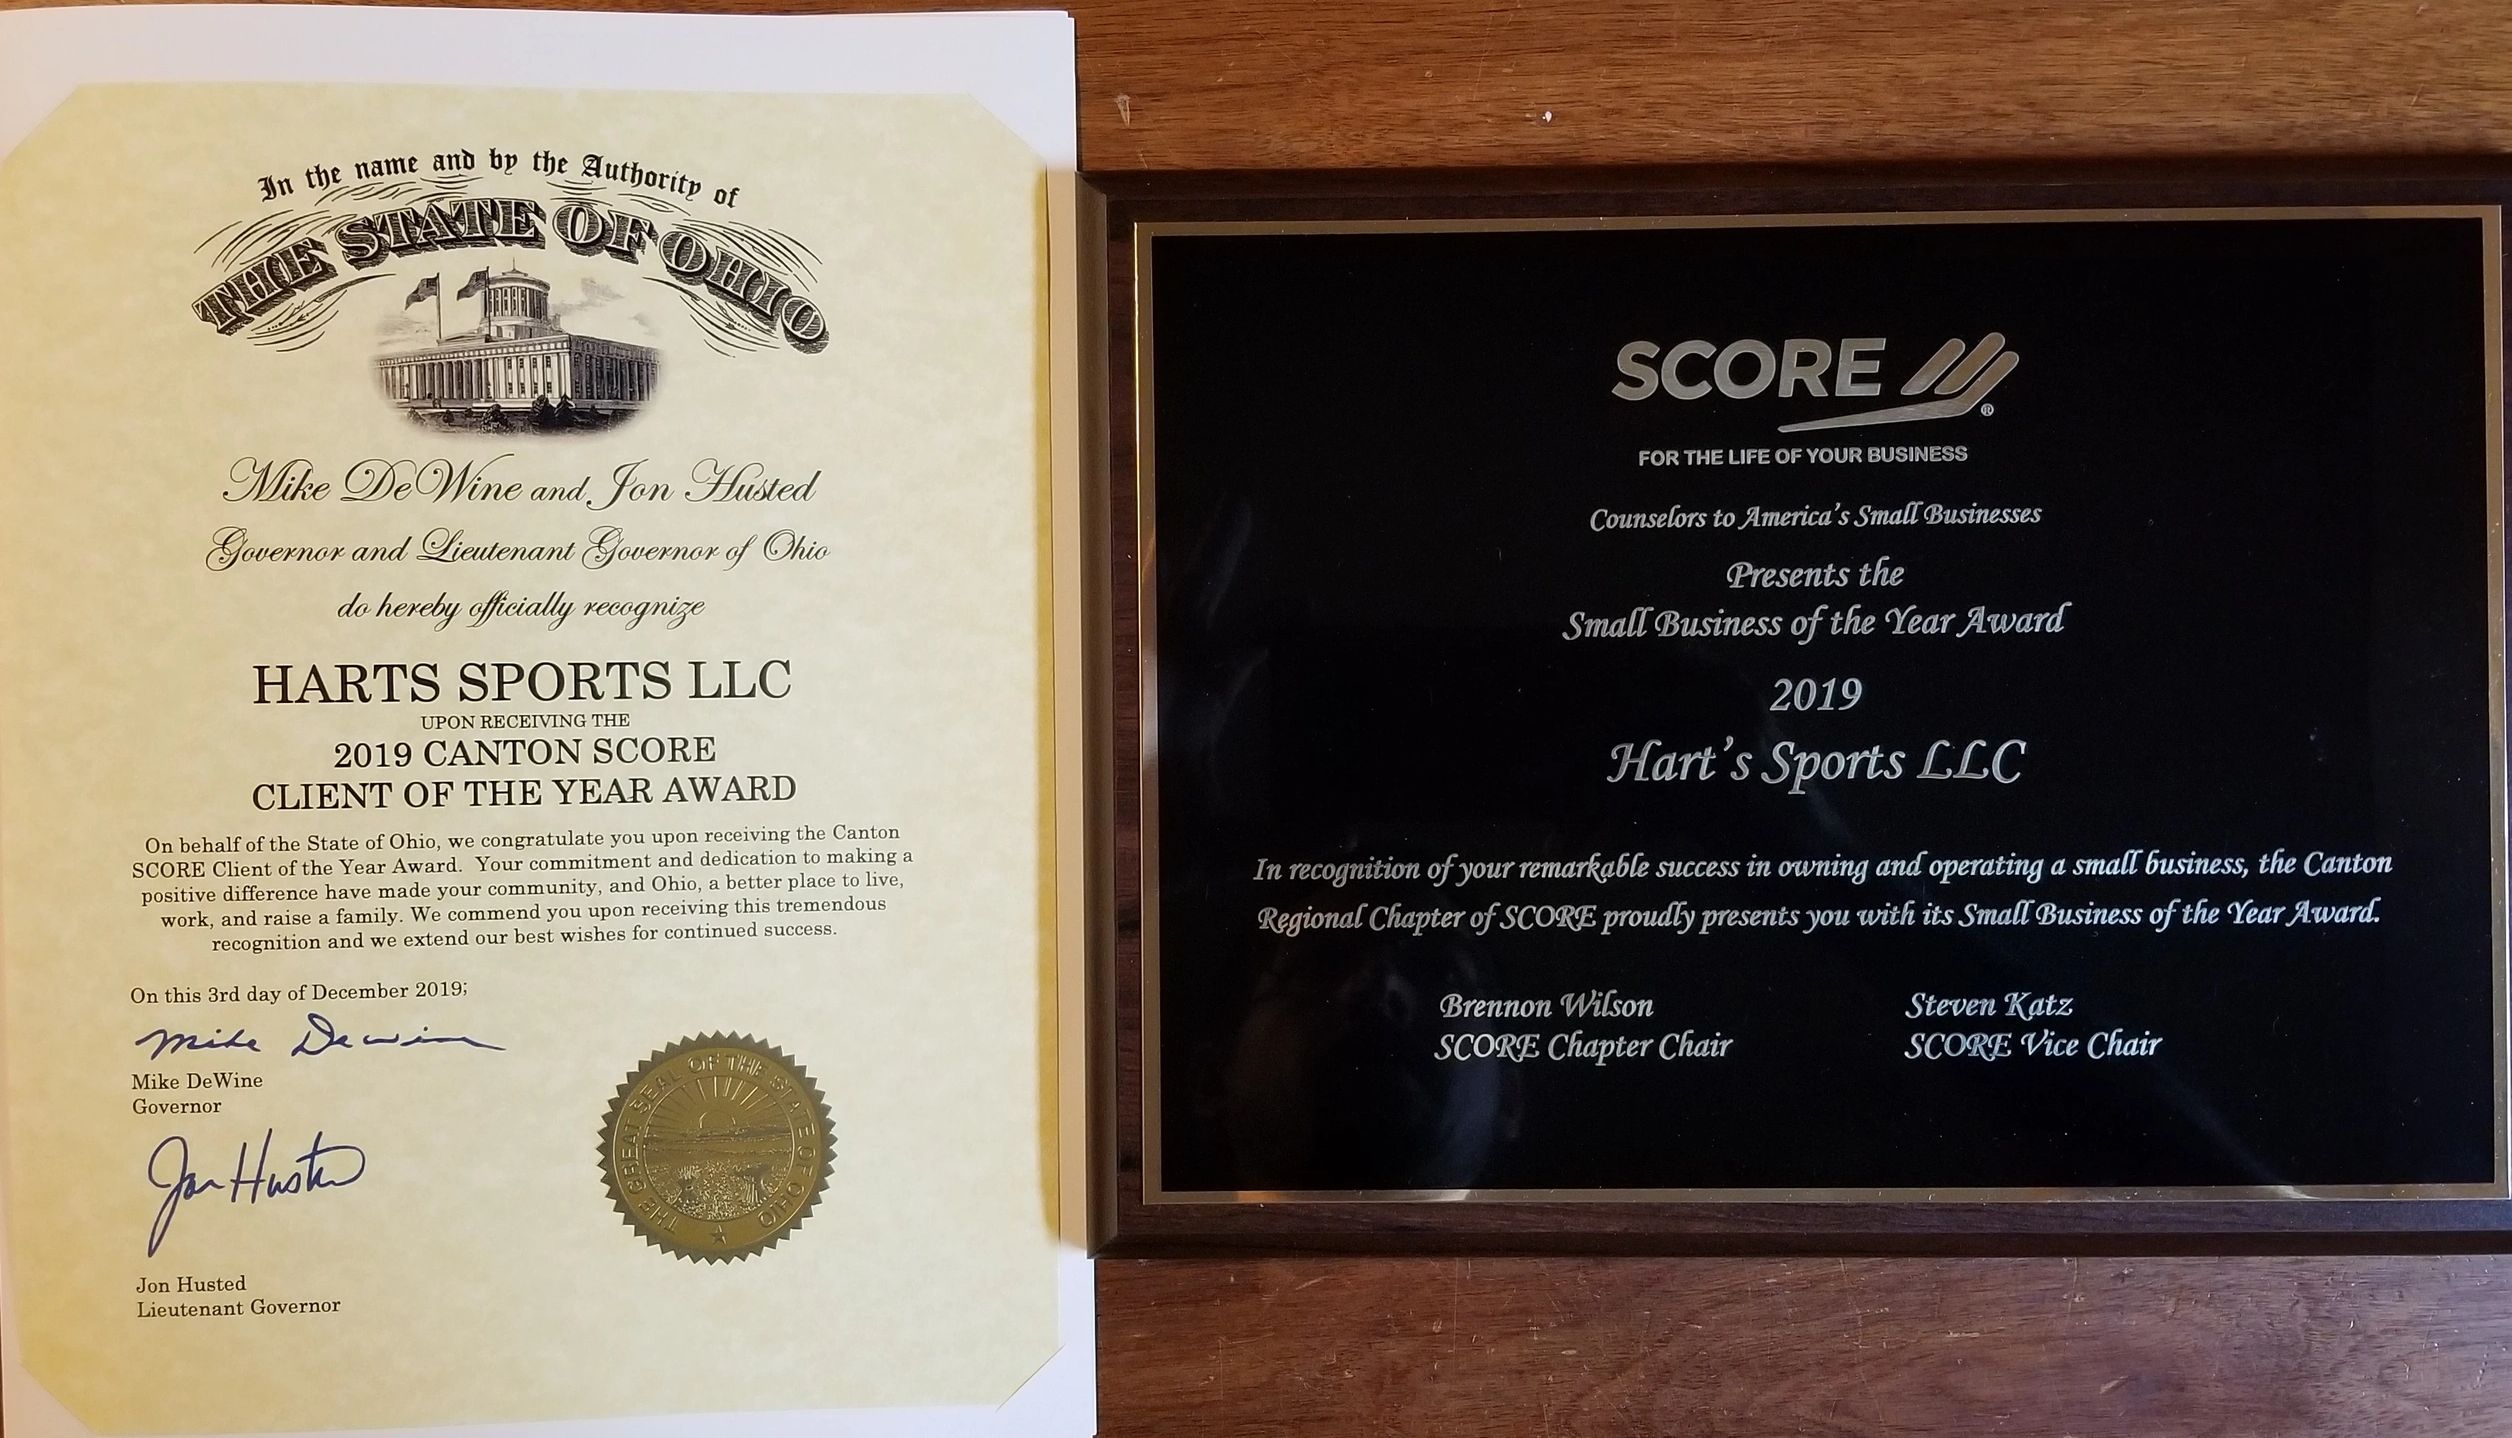 SCORE Small business of the year
harts sports winner of 2019 small business